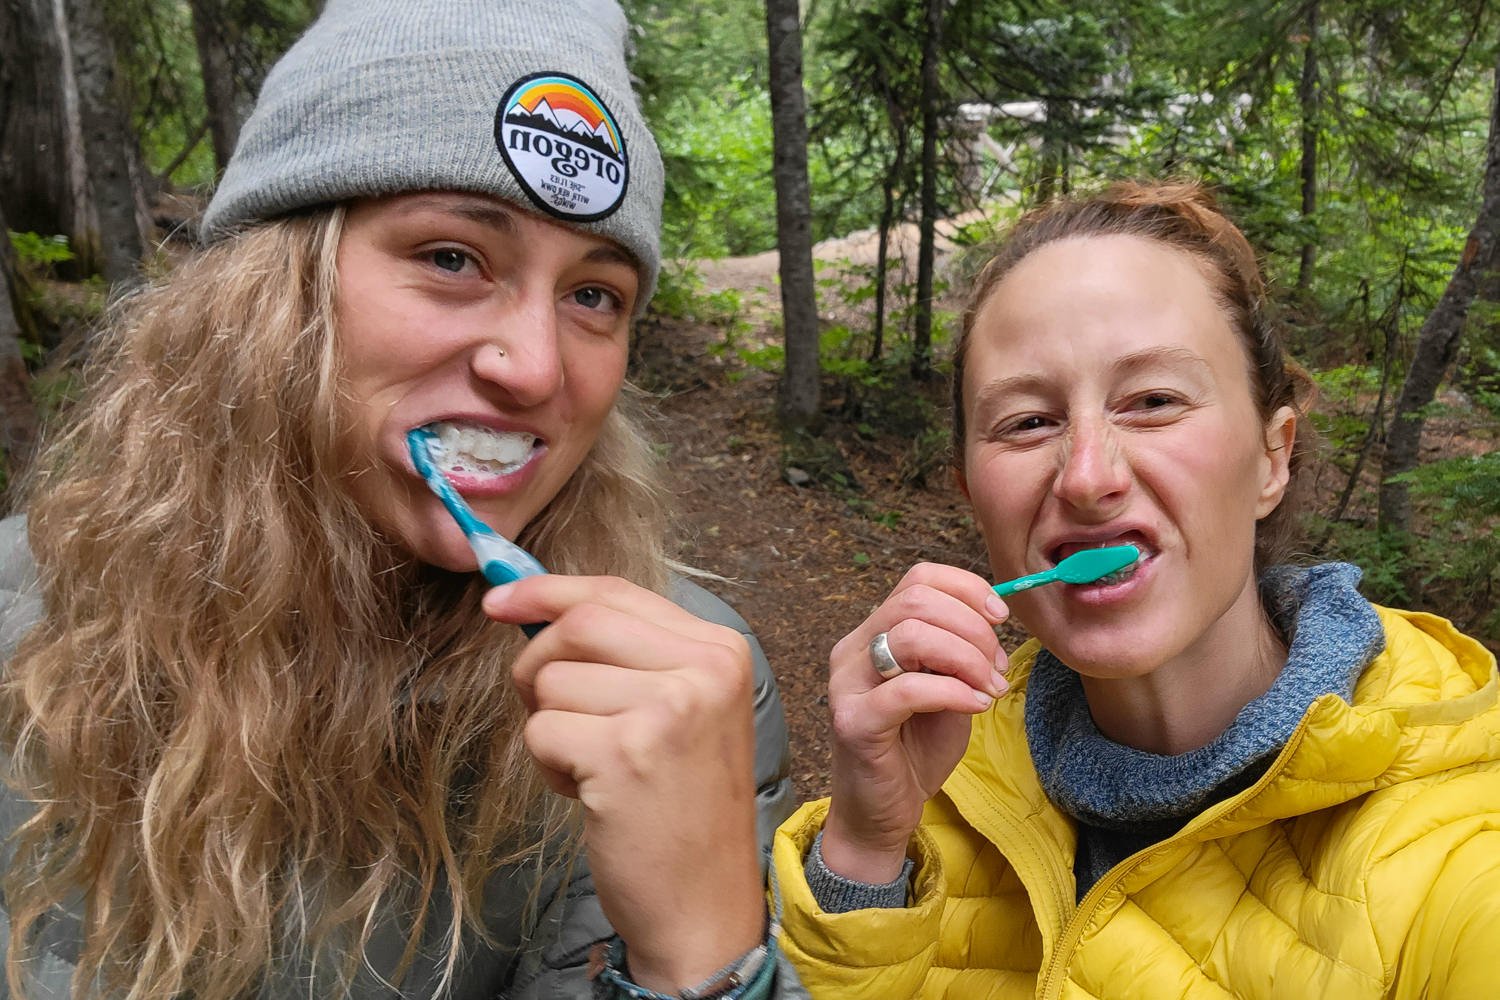 Two women brushing their teeth on a backpacking trip